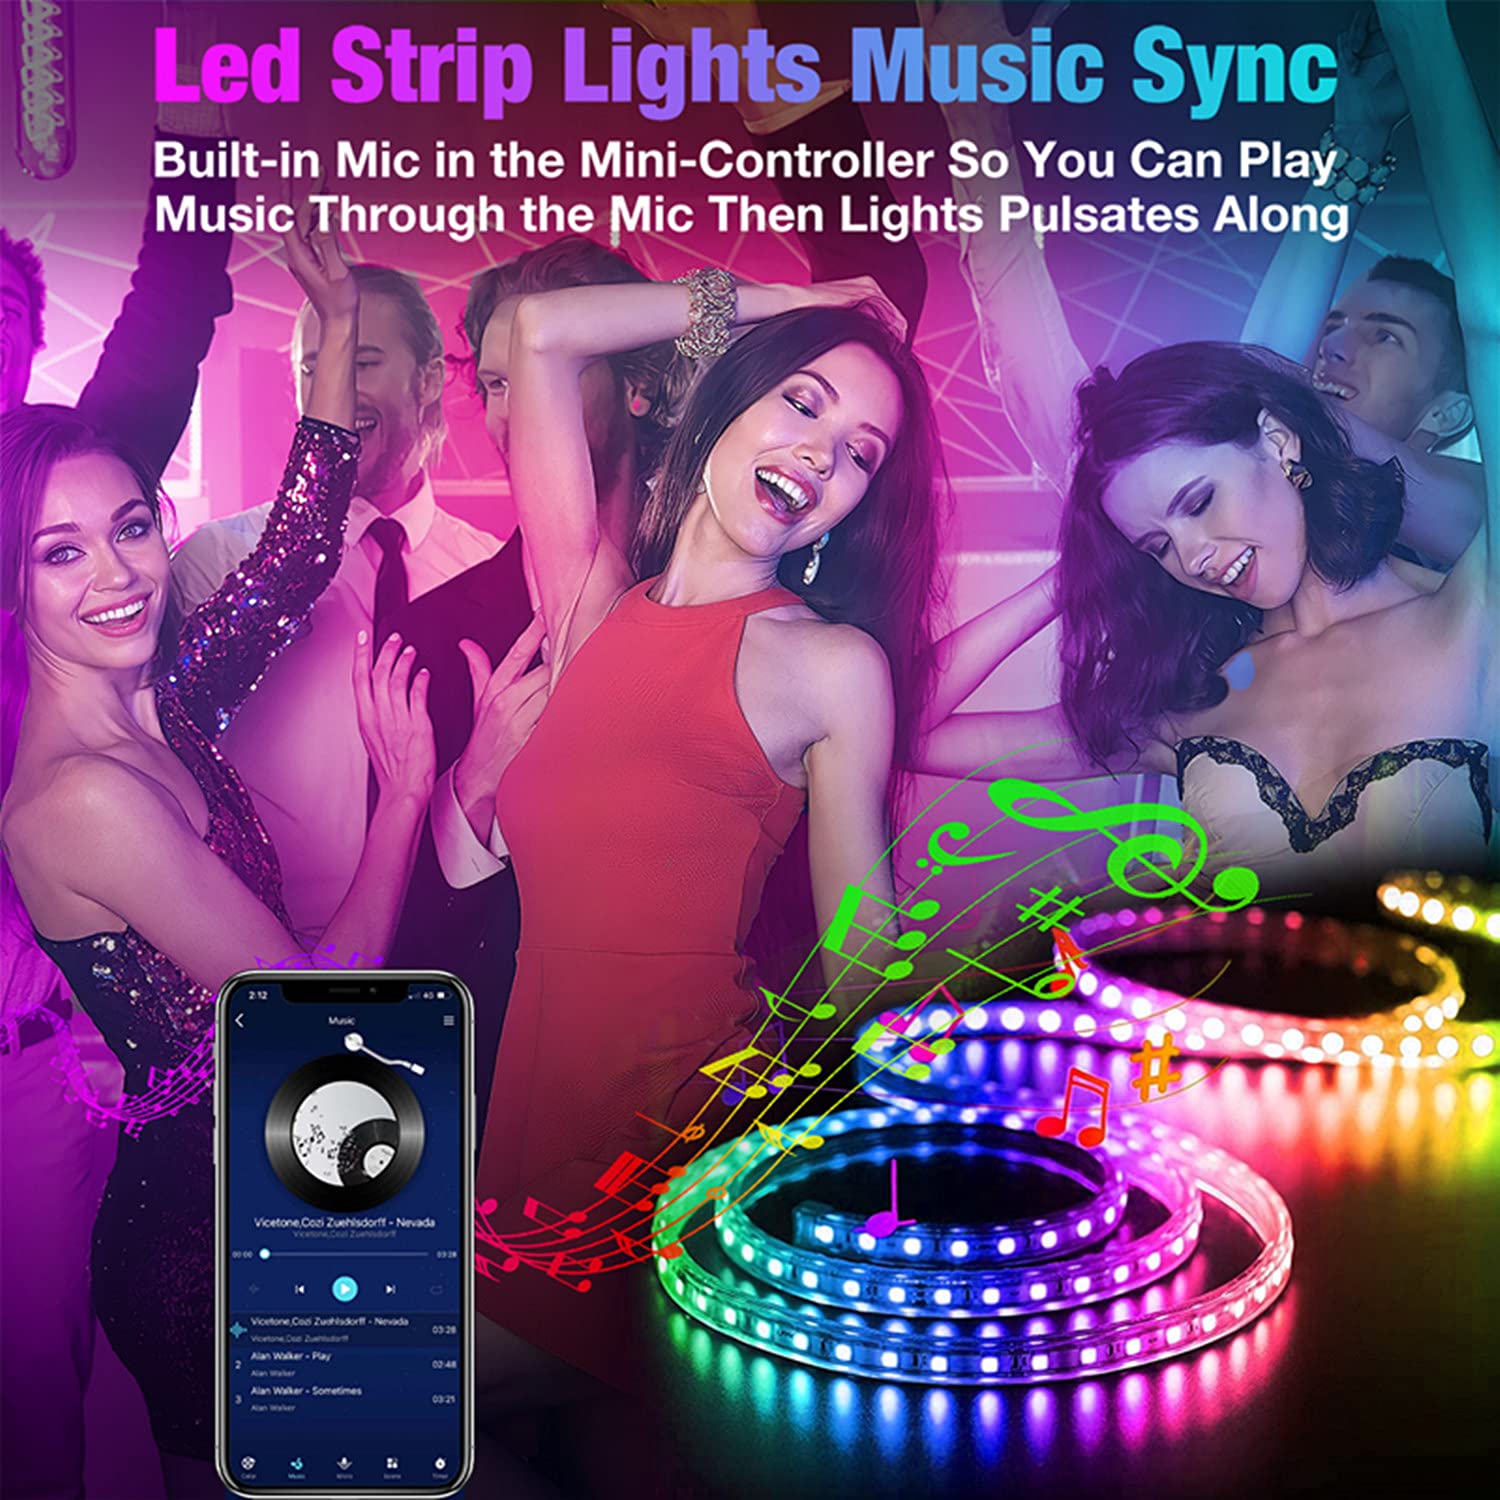 REEMEER 100ft Led Lights for Bedroom, Led Strip Lights Music Sync Color Changing Led Lights W/ App Control and Remote, Led Light Strips Used for Party, Home Decoration